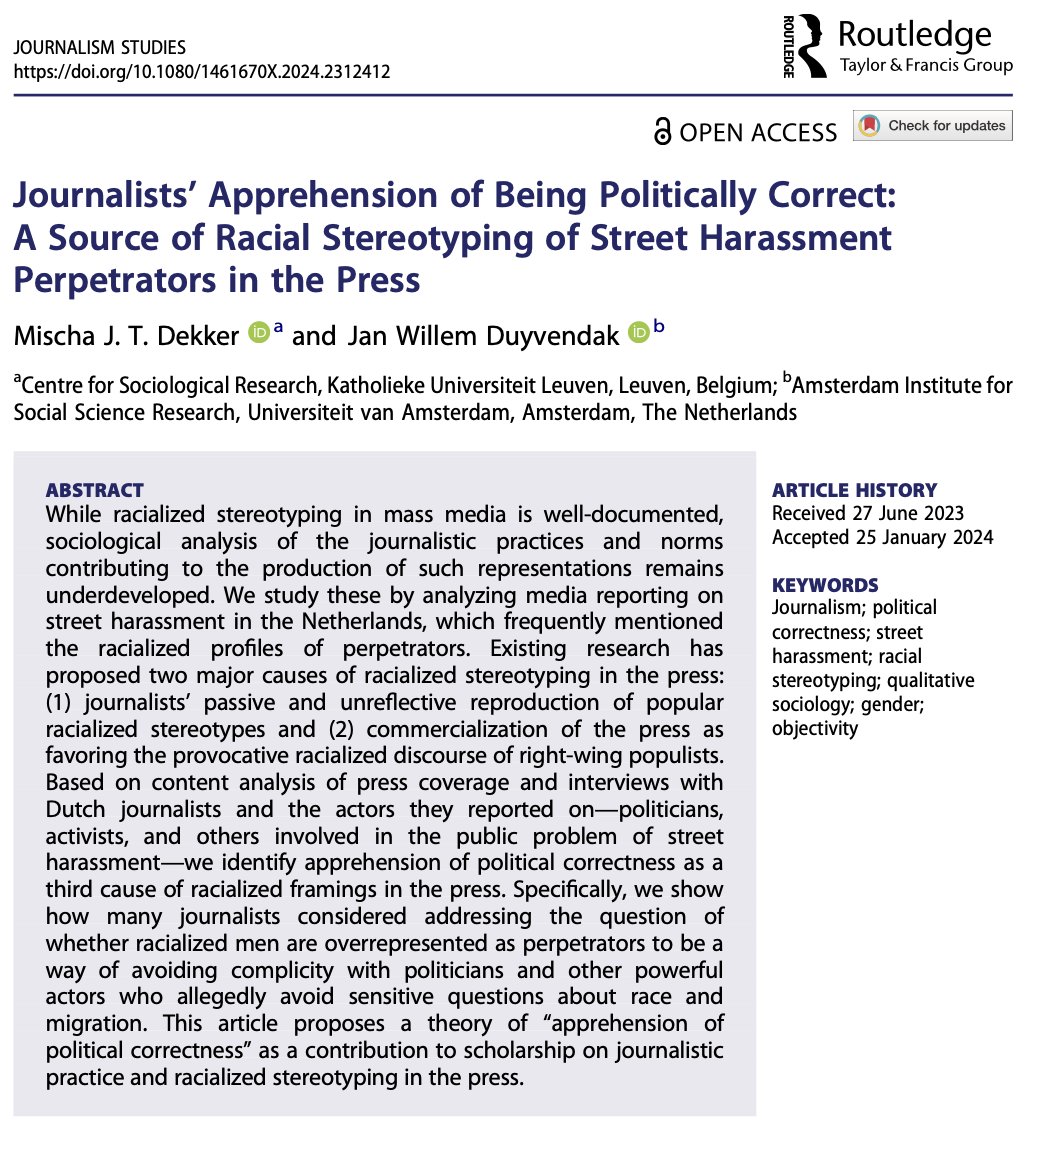 New paper in @journstudies! How do debates on political correctness inform how journalists do their work? With @jwduyvendak we identify reporters' concern about being politically correct as a source of racial stereotyping of street harassment perpetrators tandfonline.com/doi/metrics/10…